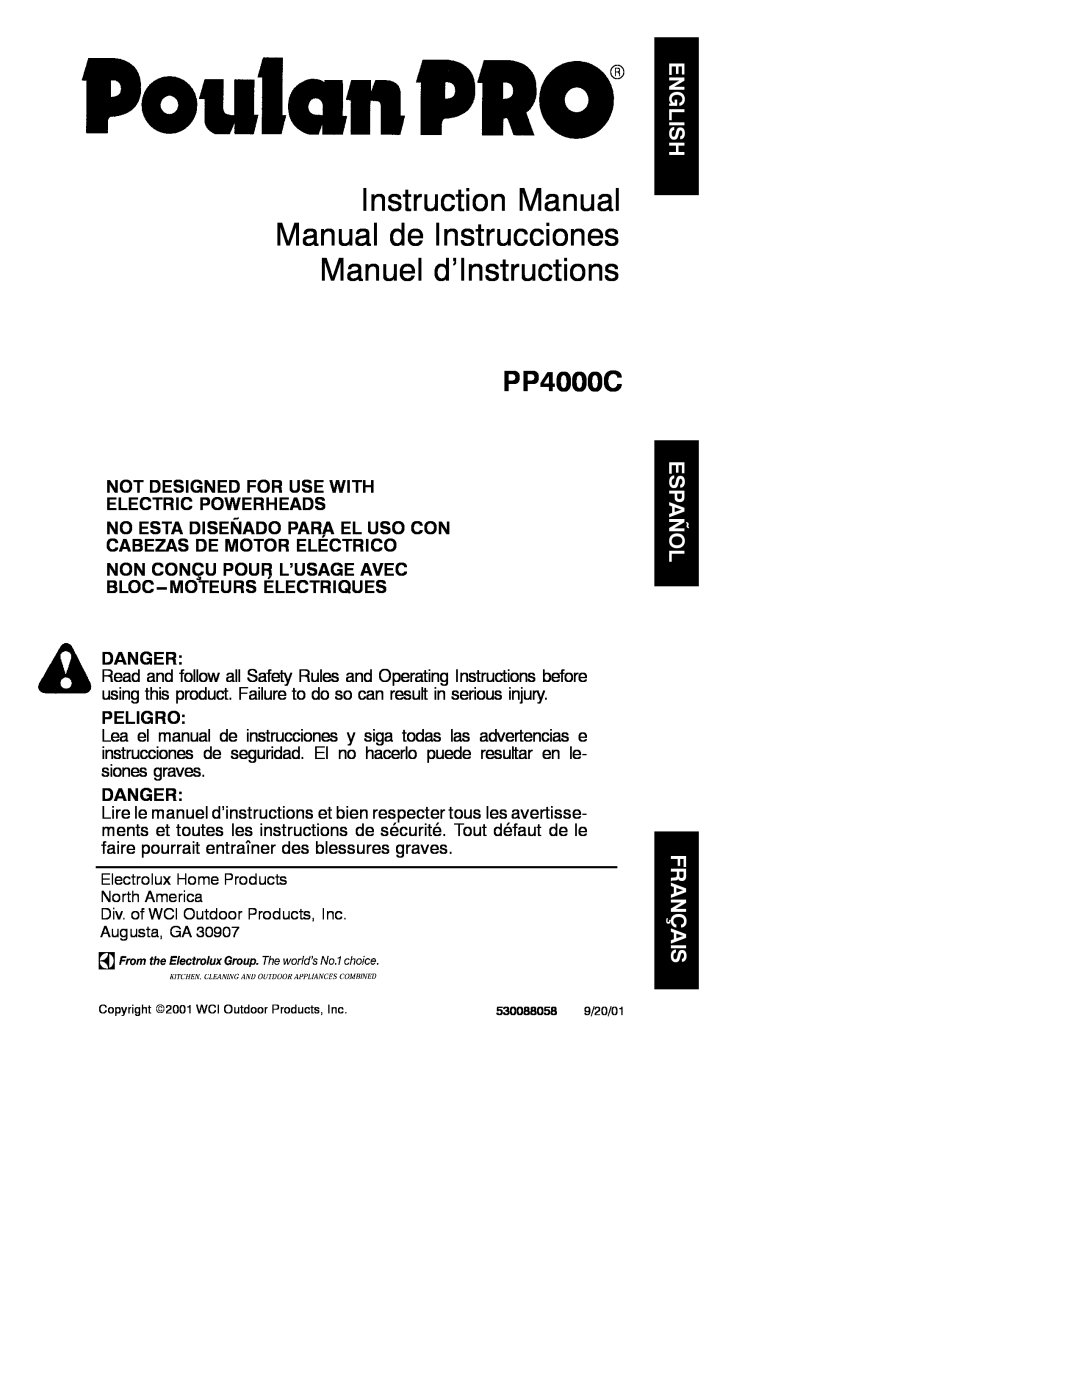 Poulan 530088058 instruction manual Danger, Peligro, PP4000C, Not Designed For Use With Electric Powerheads 